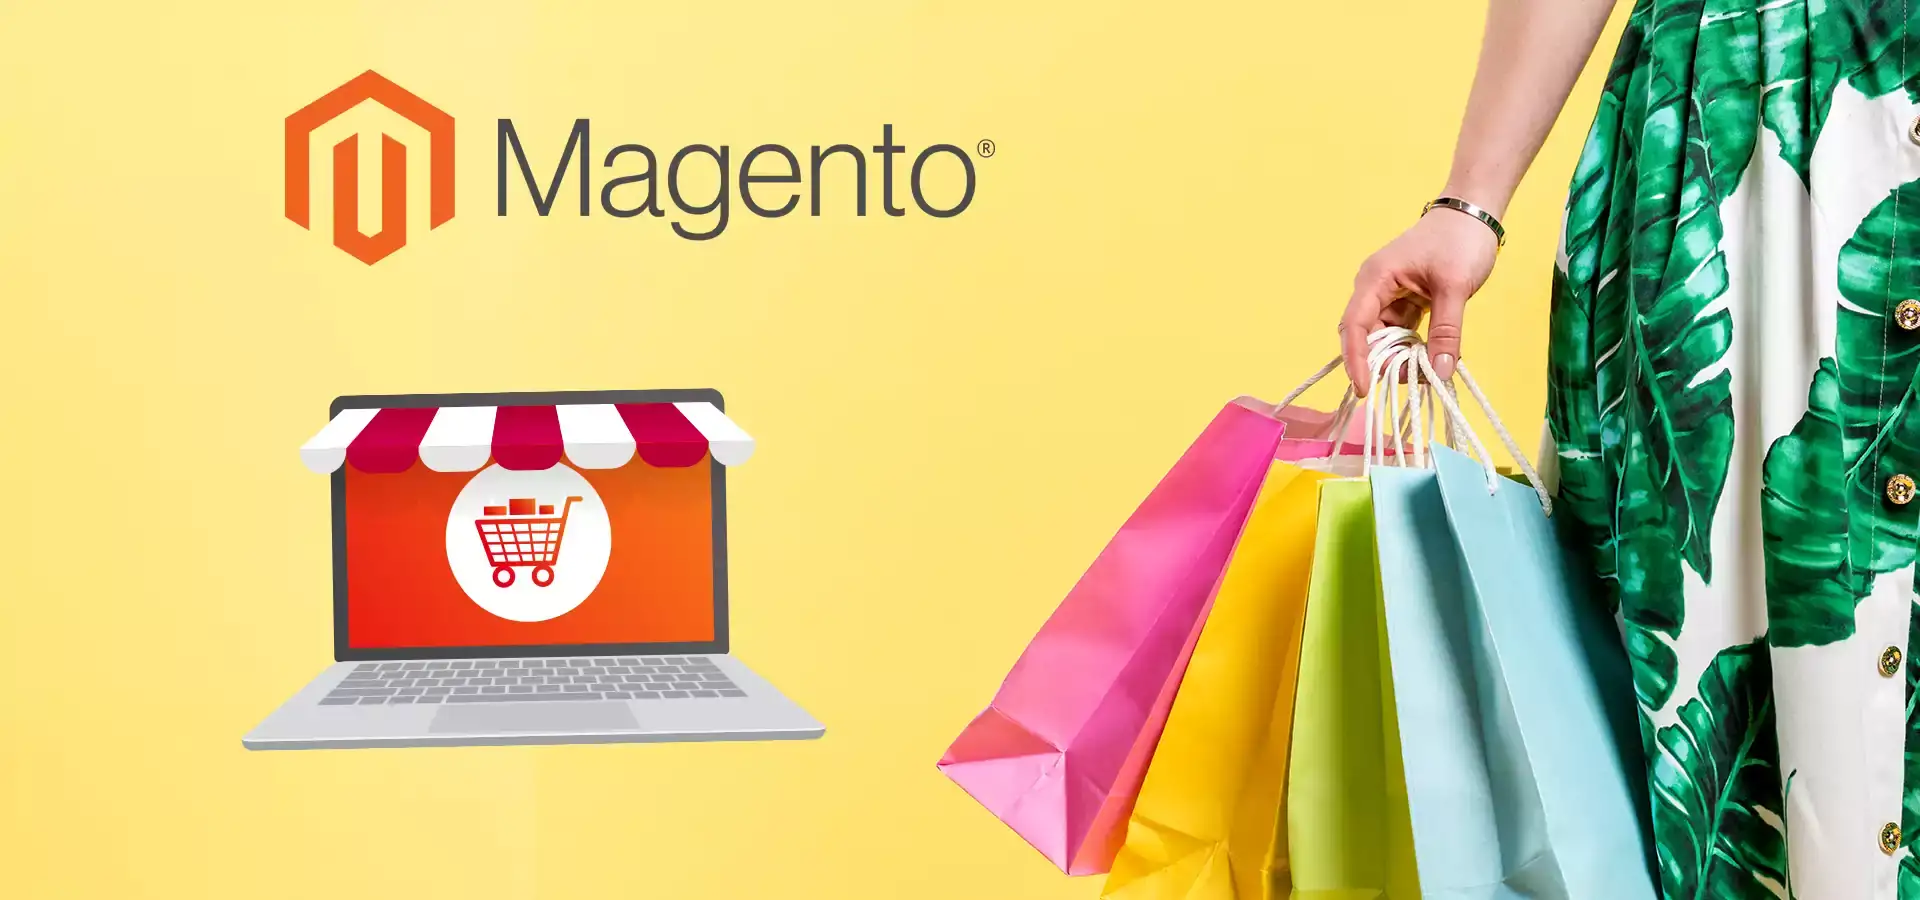 reasons-to-prove-that-magento-is-the-right-e-commerce-platform-related-blog-16